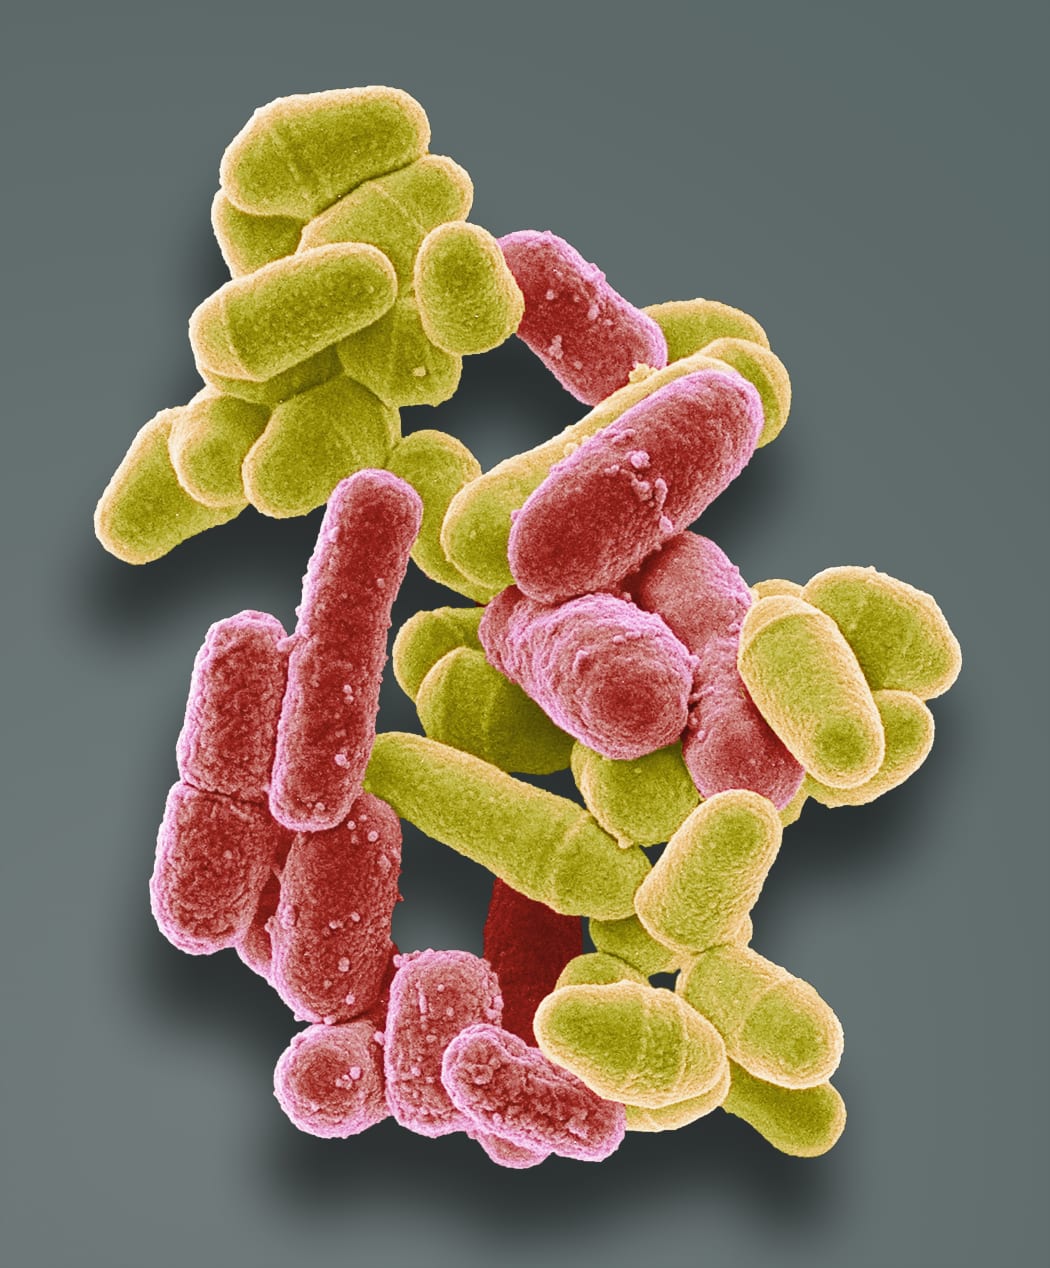 Bacteria and yeast